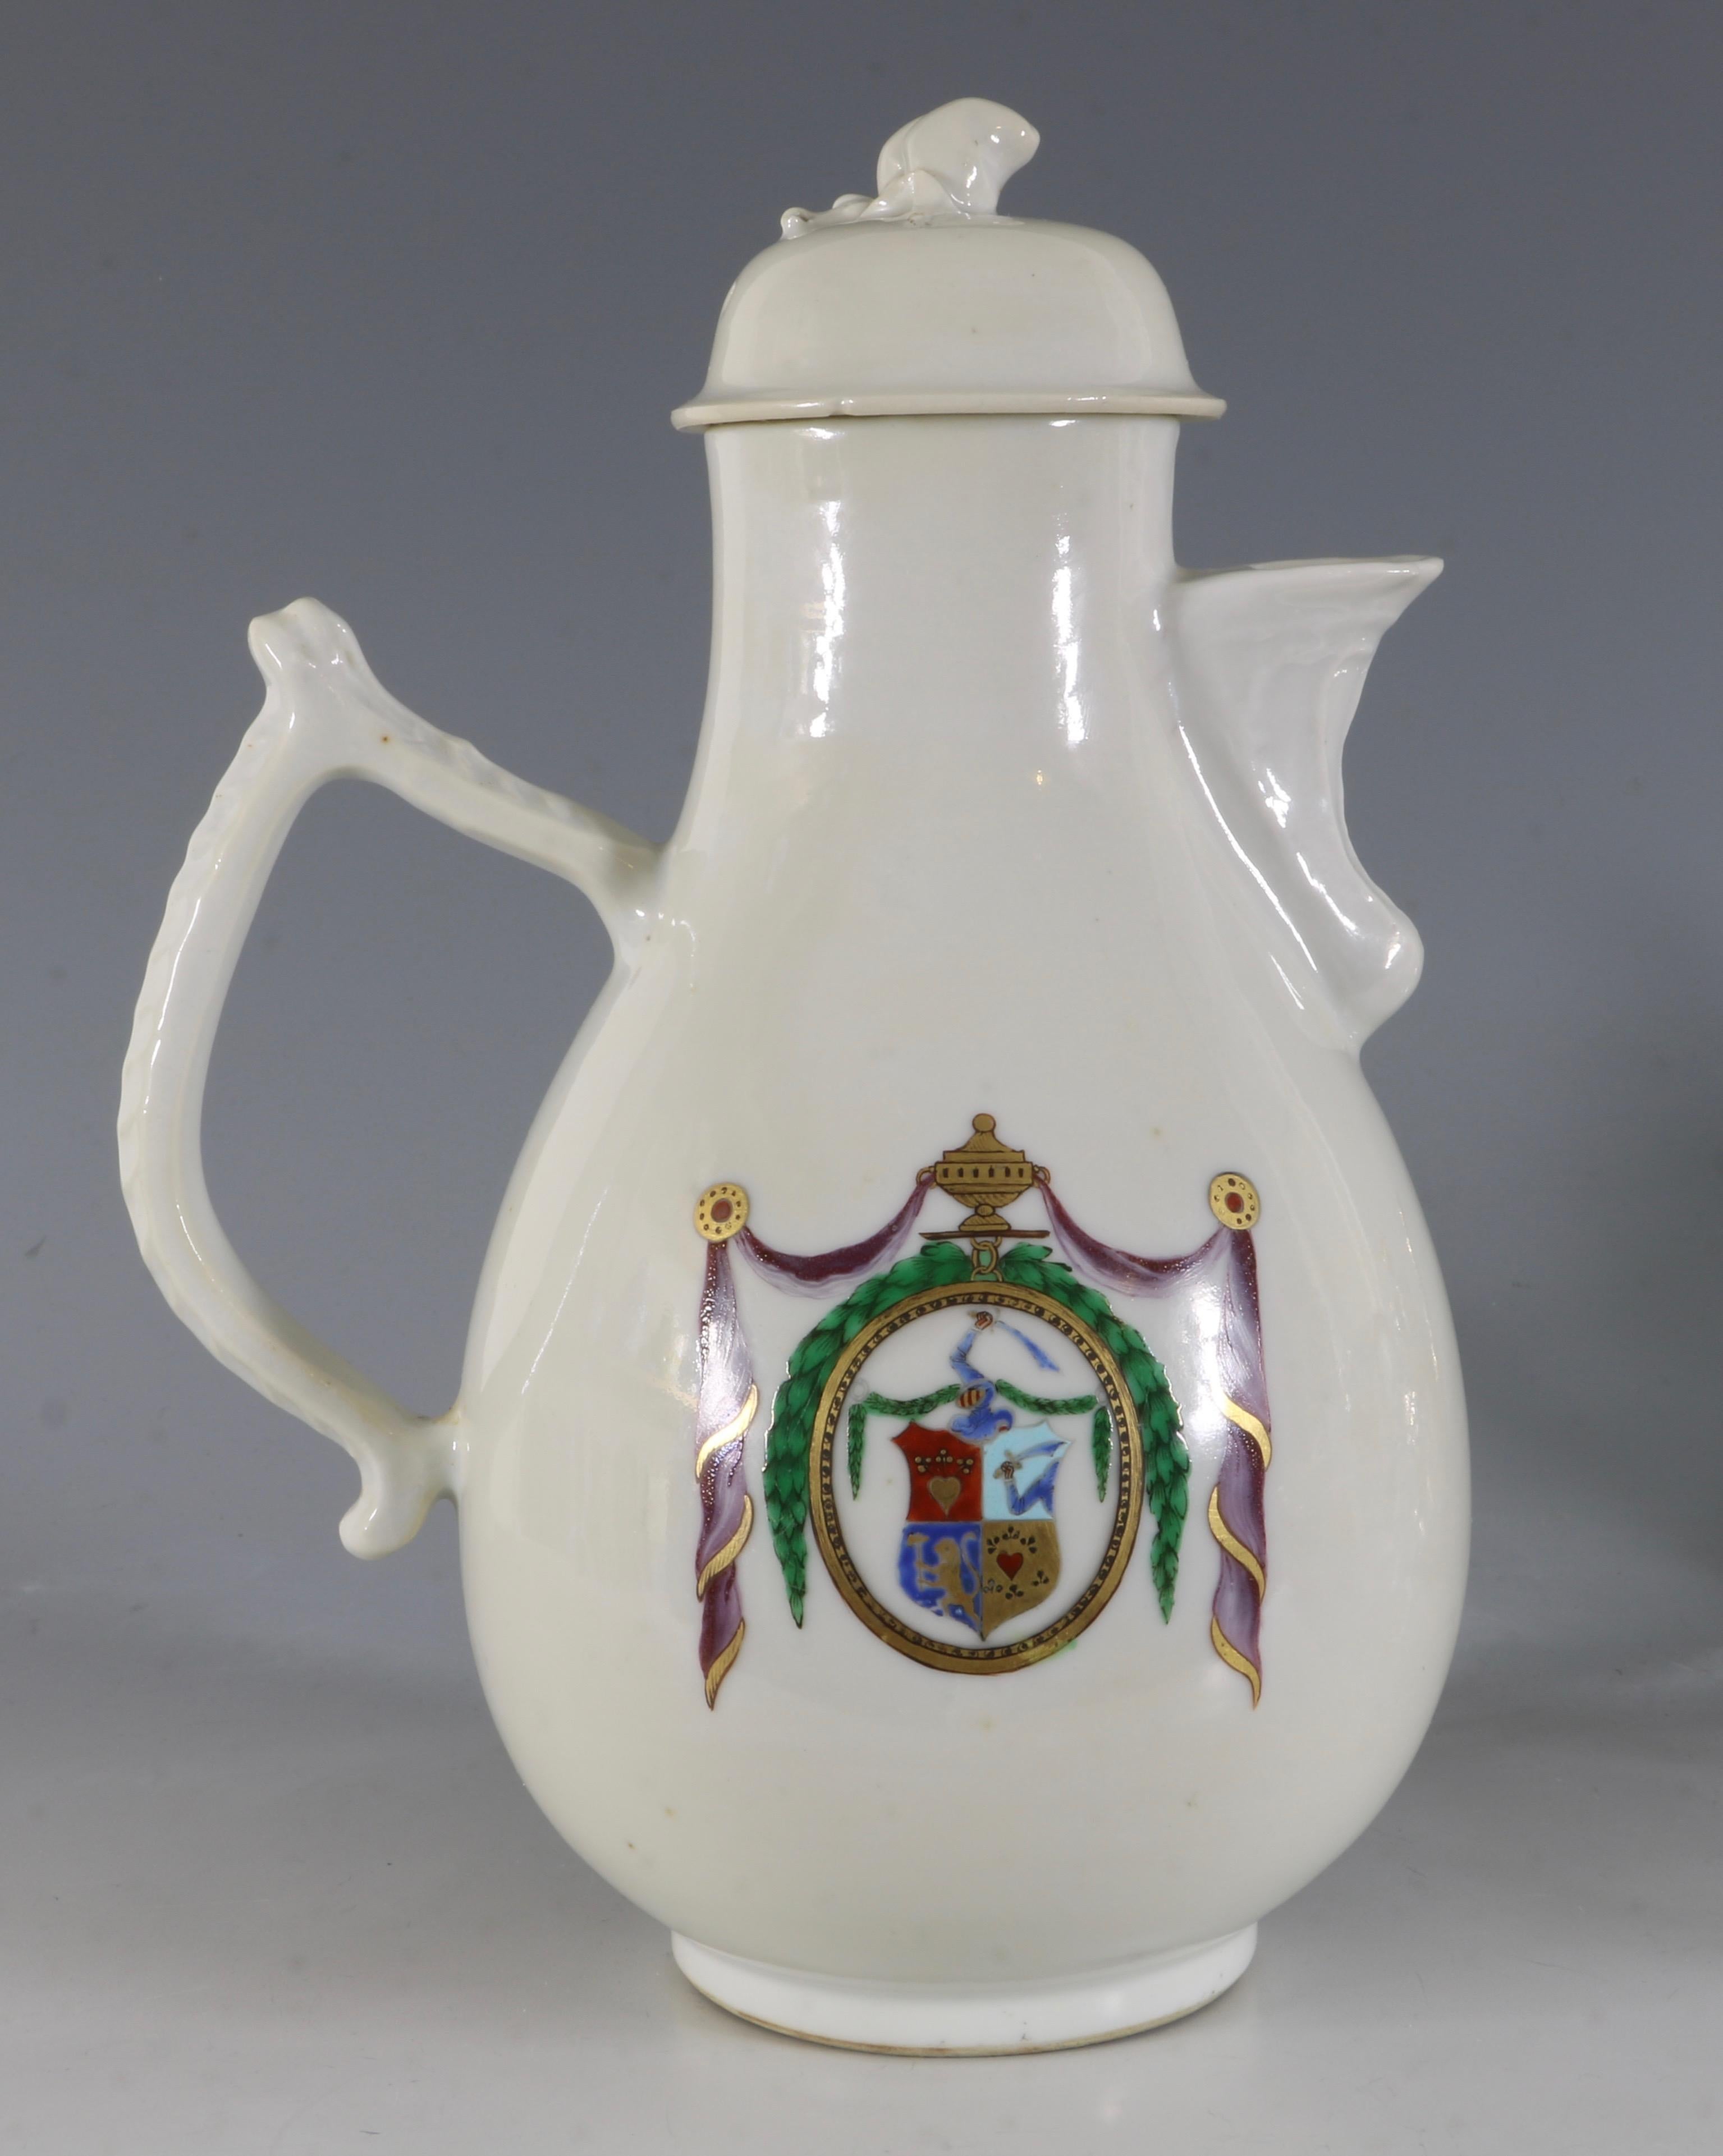 A Dutch market armorial coffee pot with the arms of Pook Van Baggen. Qianlong, circa 1786.
This Amorial service was ordered by the Dutch East India Company (VOC) Captain Eduard Ldewijk Pook Van Baggen. Who travelled to canton in the autumn of 1786